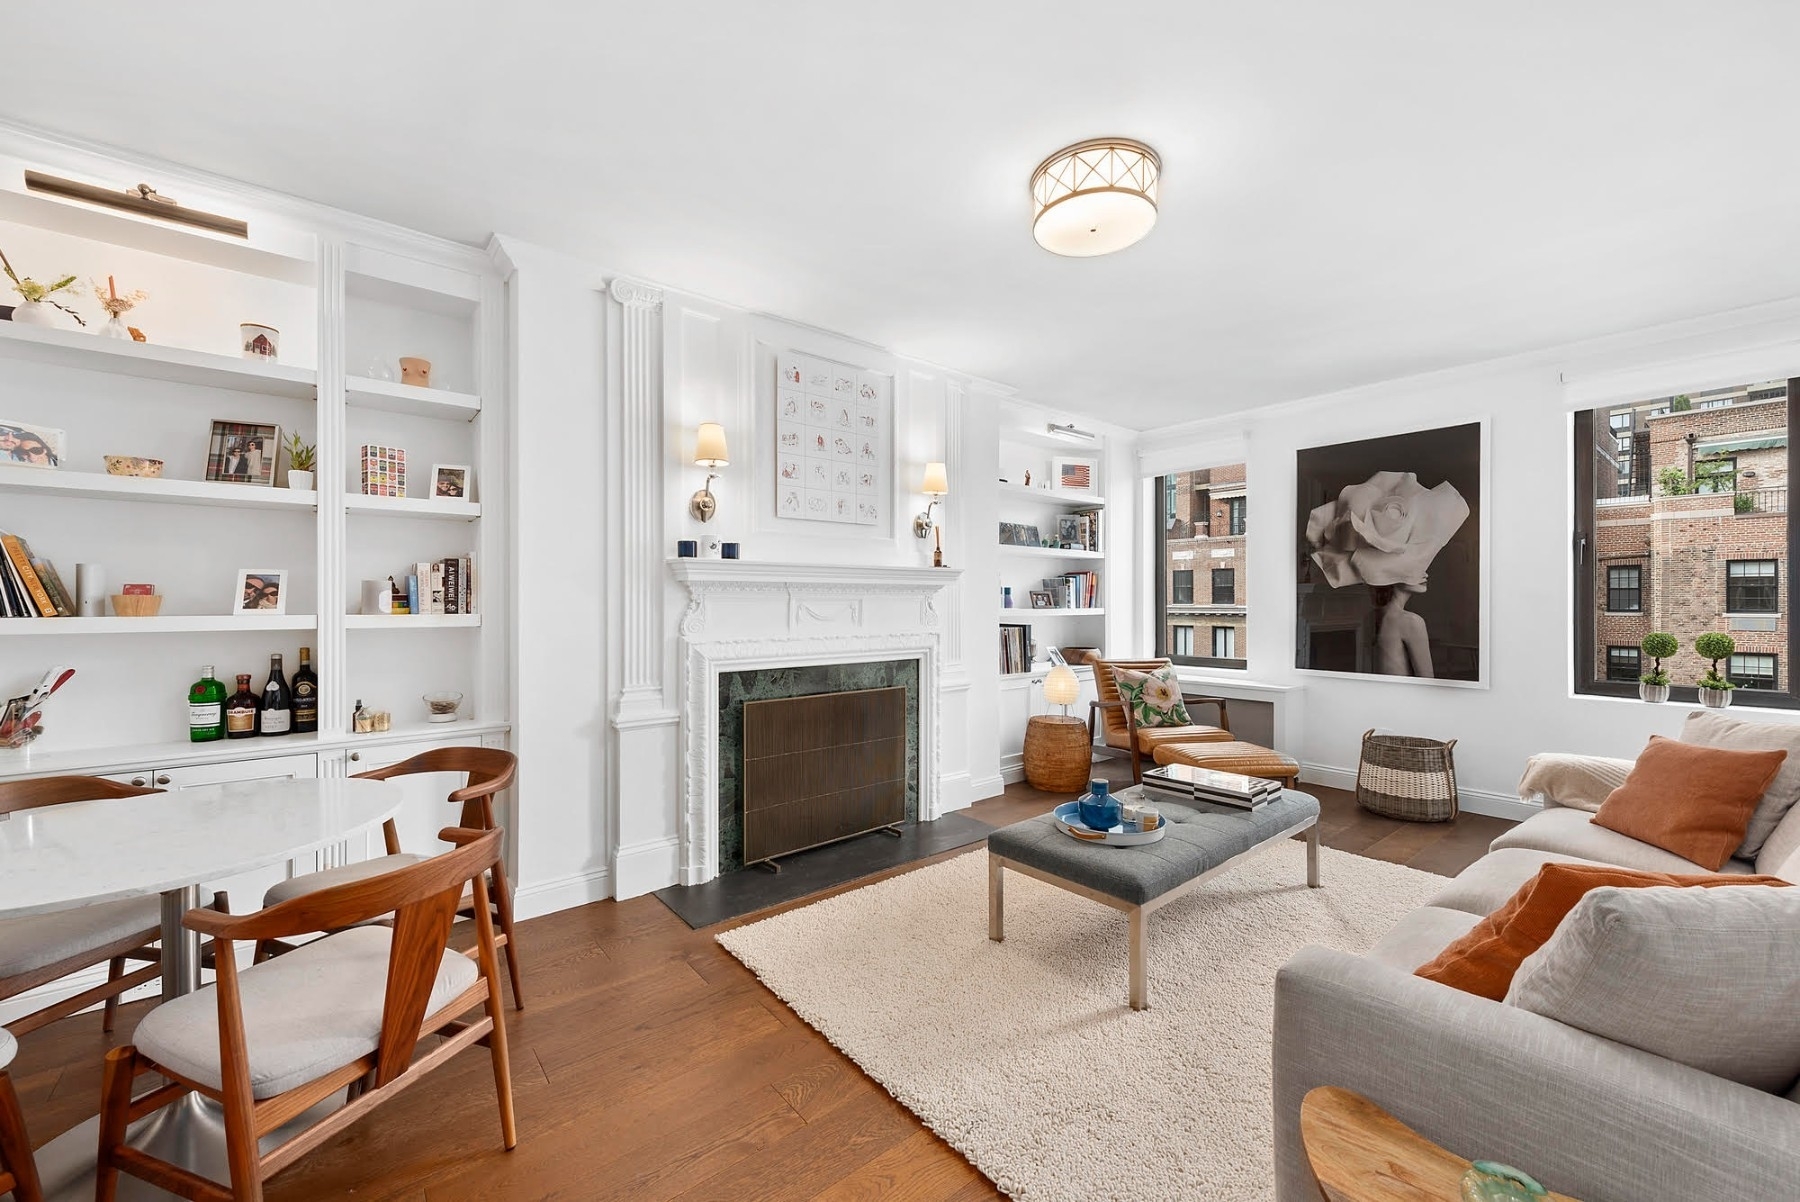 Property at 444 E 57TH ST, 15B Sutton Place, New York, New York 10022